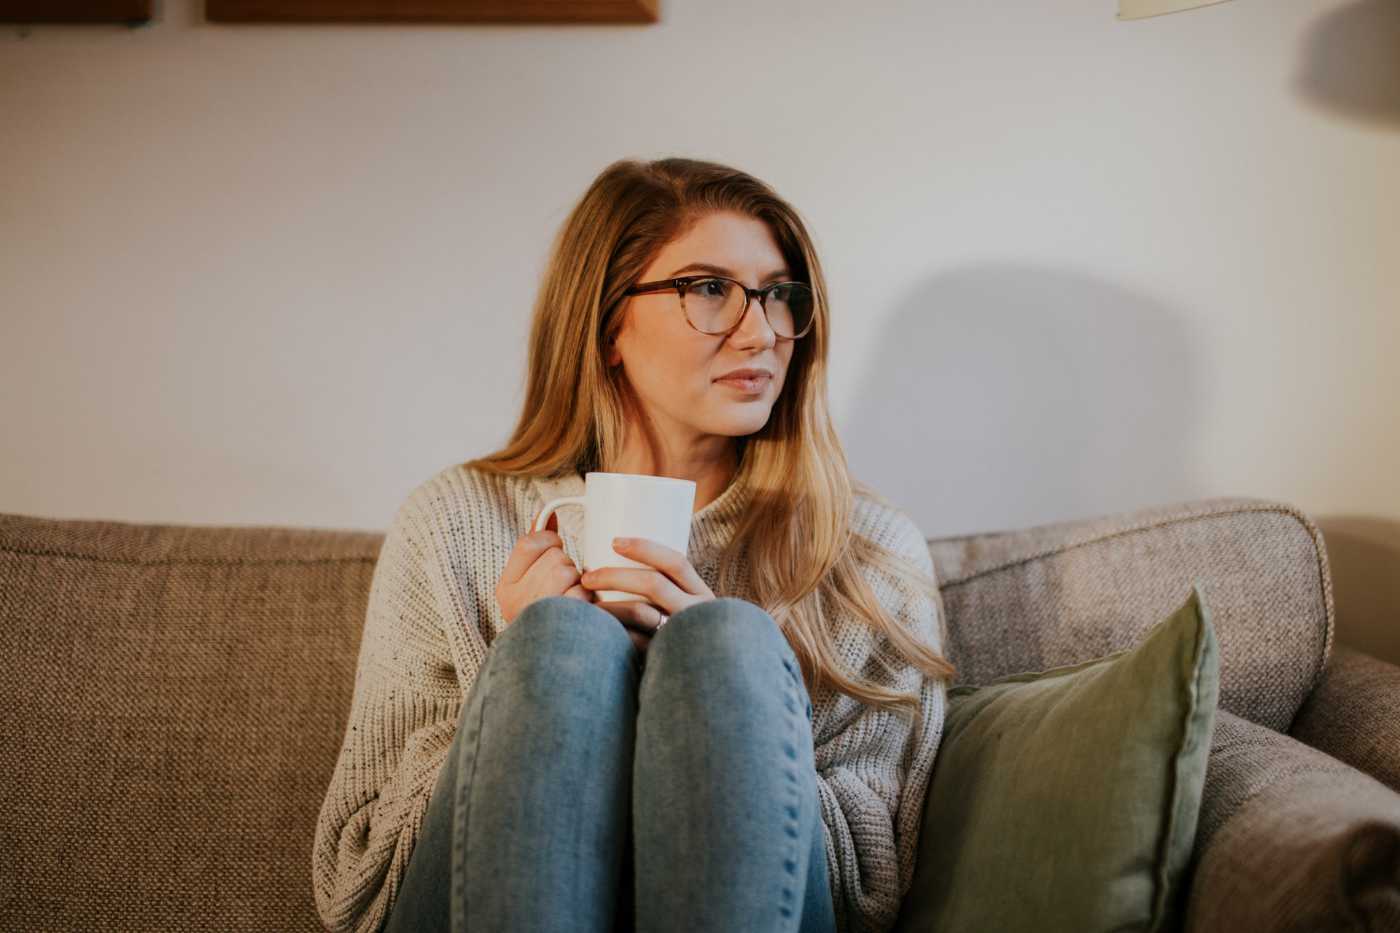 woman on couch thinking about her anxiety